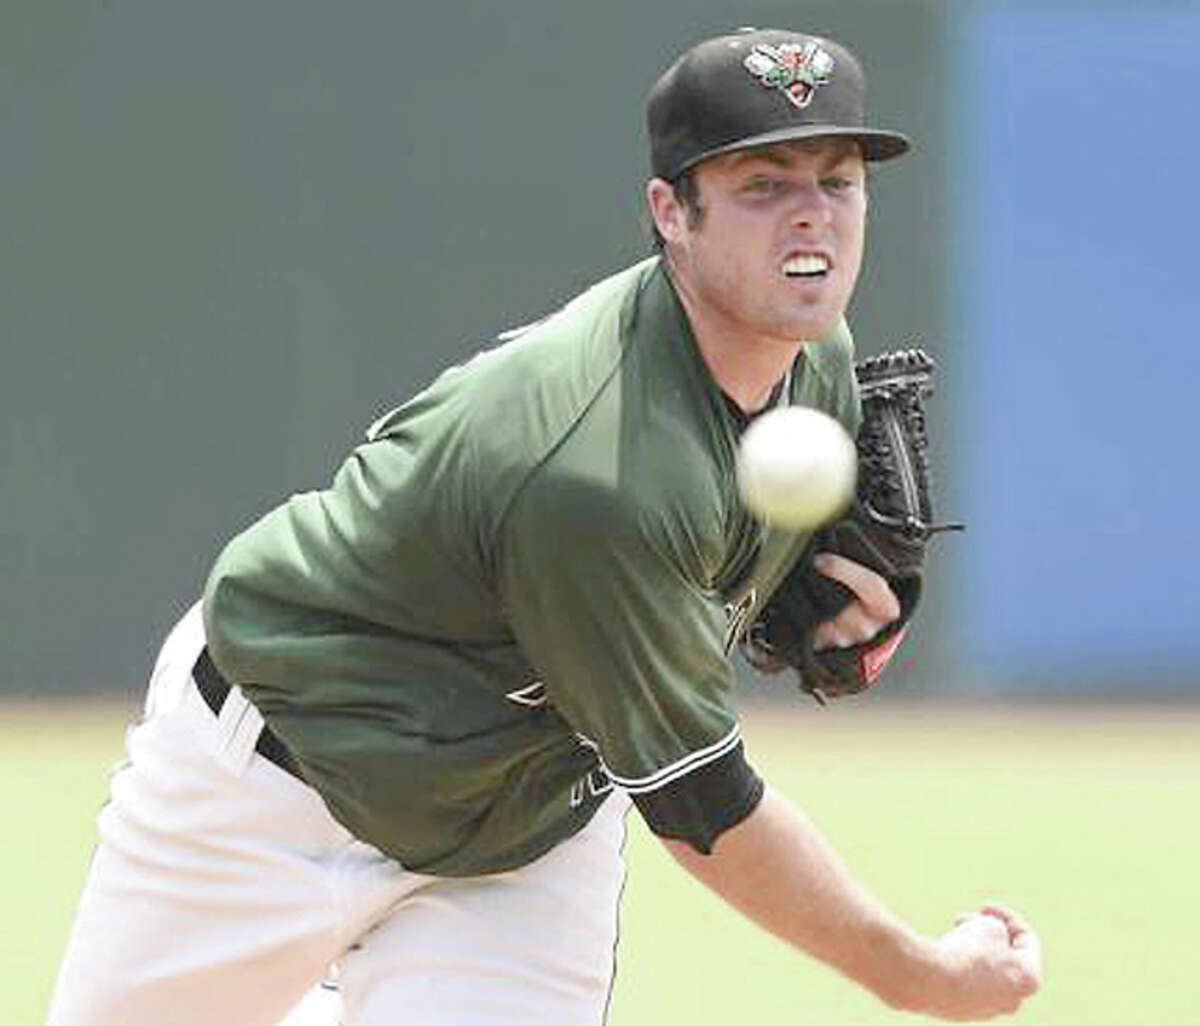 Carrollton High and SIU Carbondale product Sam Coonrod, shown in minor-league action last season, has been promoted to the Double-A Richmond Flying Squirrels.